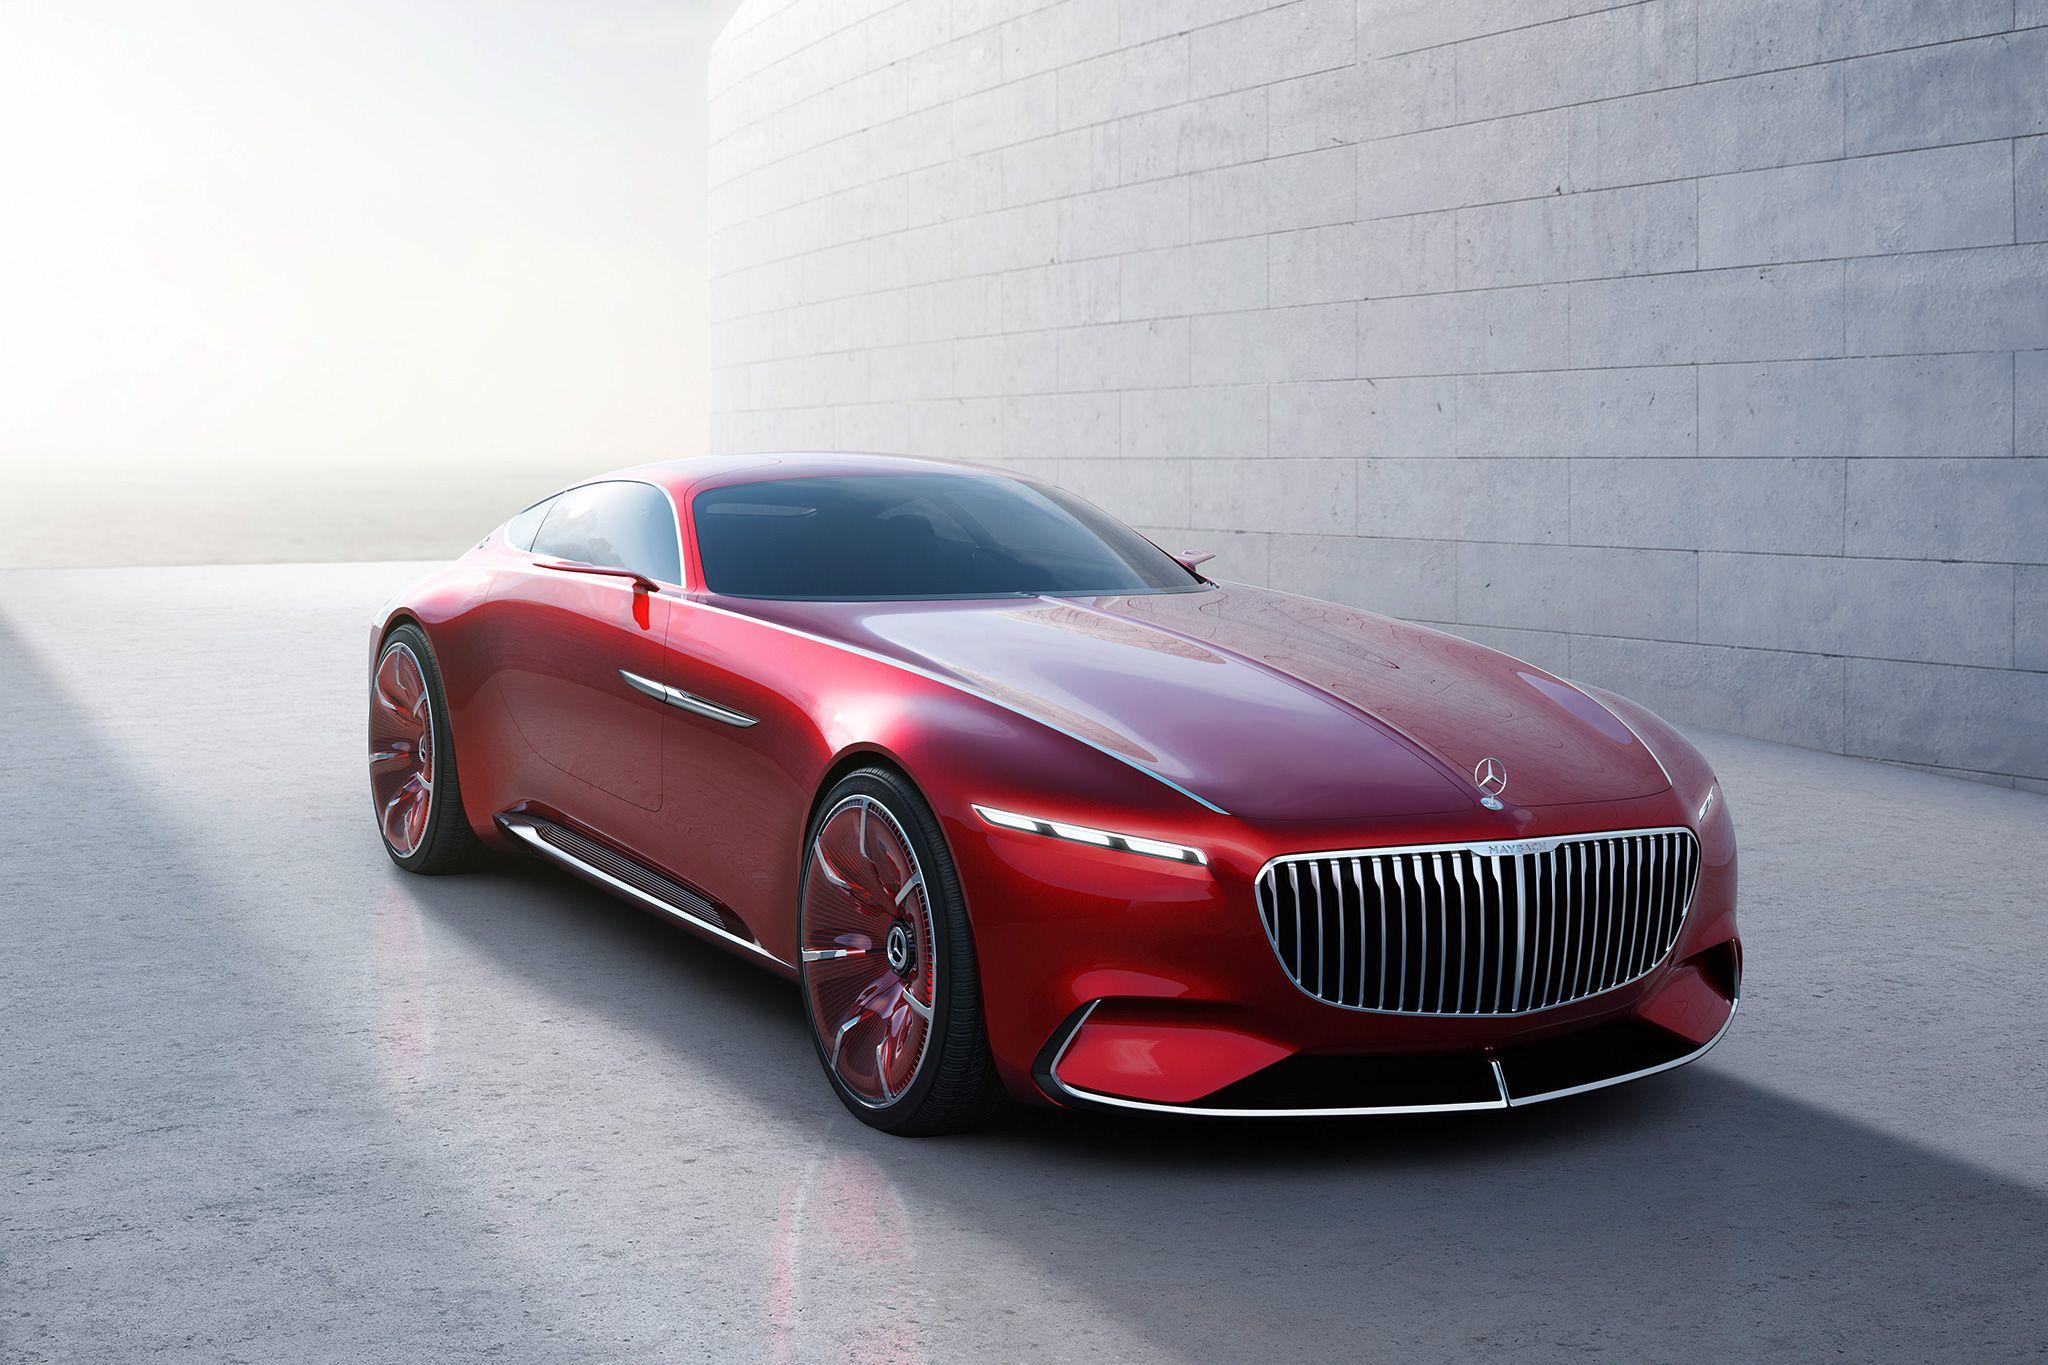 Mercedes Maybach Vision 6 Concept, HD Cars, 4k Wallpapers, Image